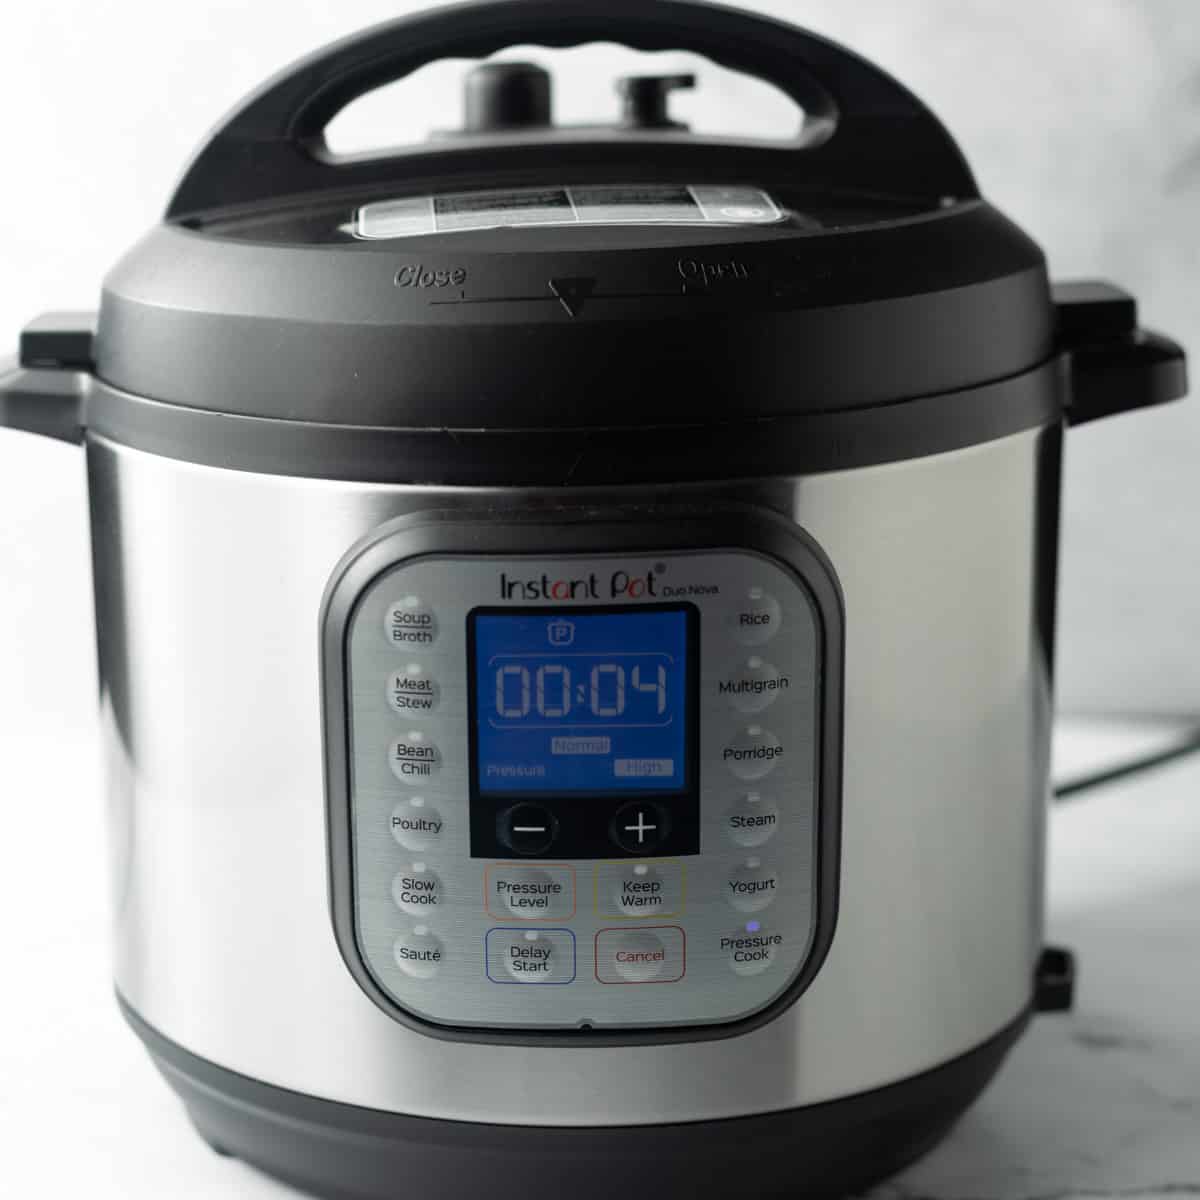 Instant Pot with lid attached is shown and the digital display is set to pressure cook for 4 minutes.